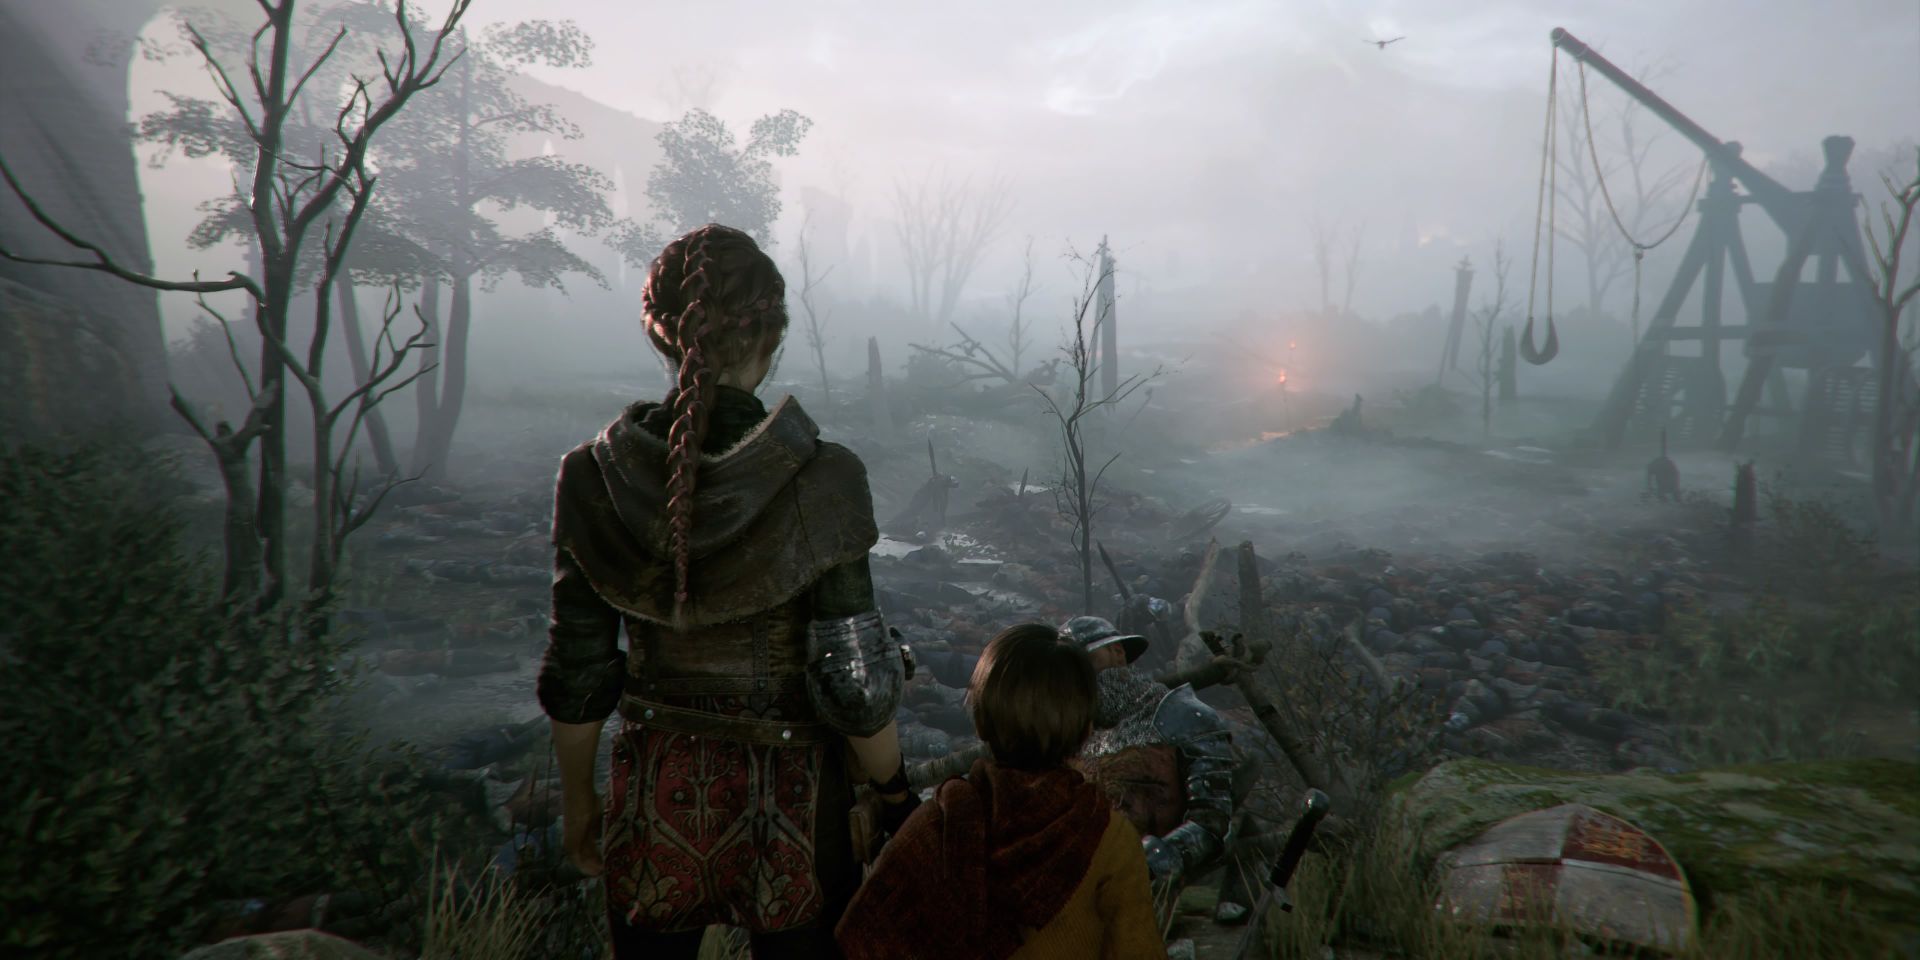 A Plague Tale Innocence Beginner’s Guide to Avoiding Detection